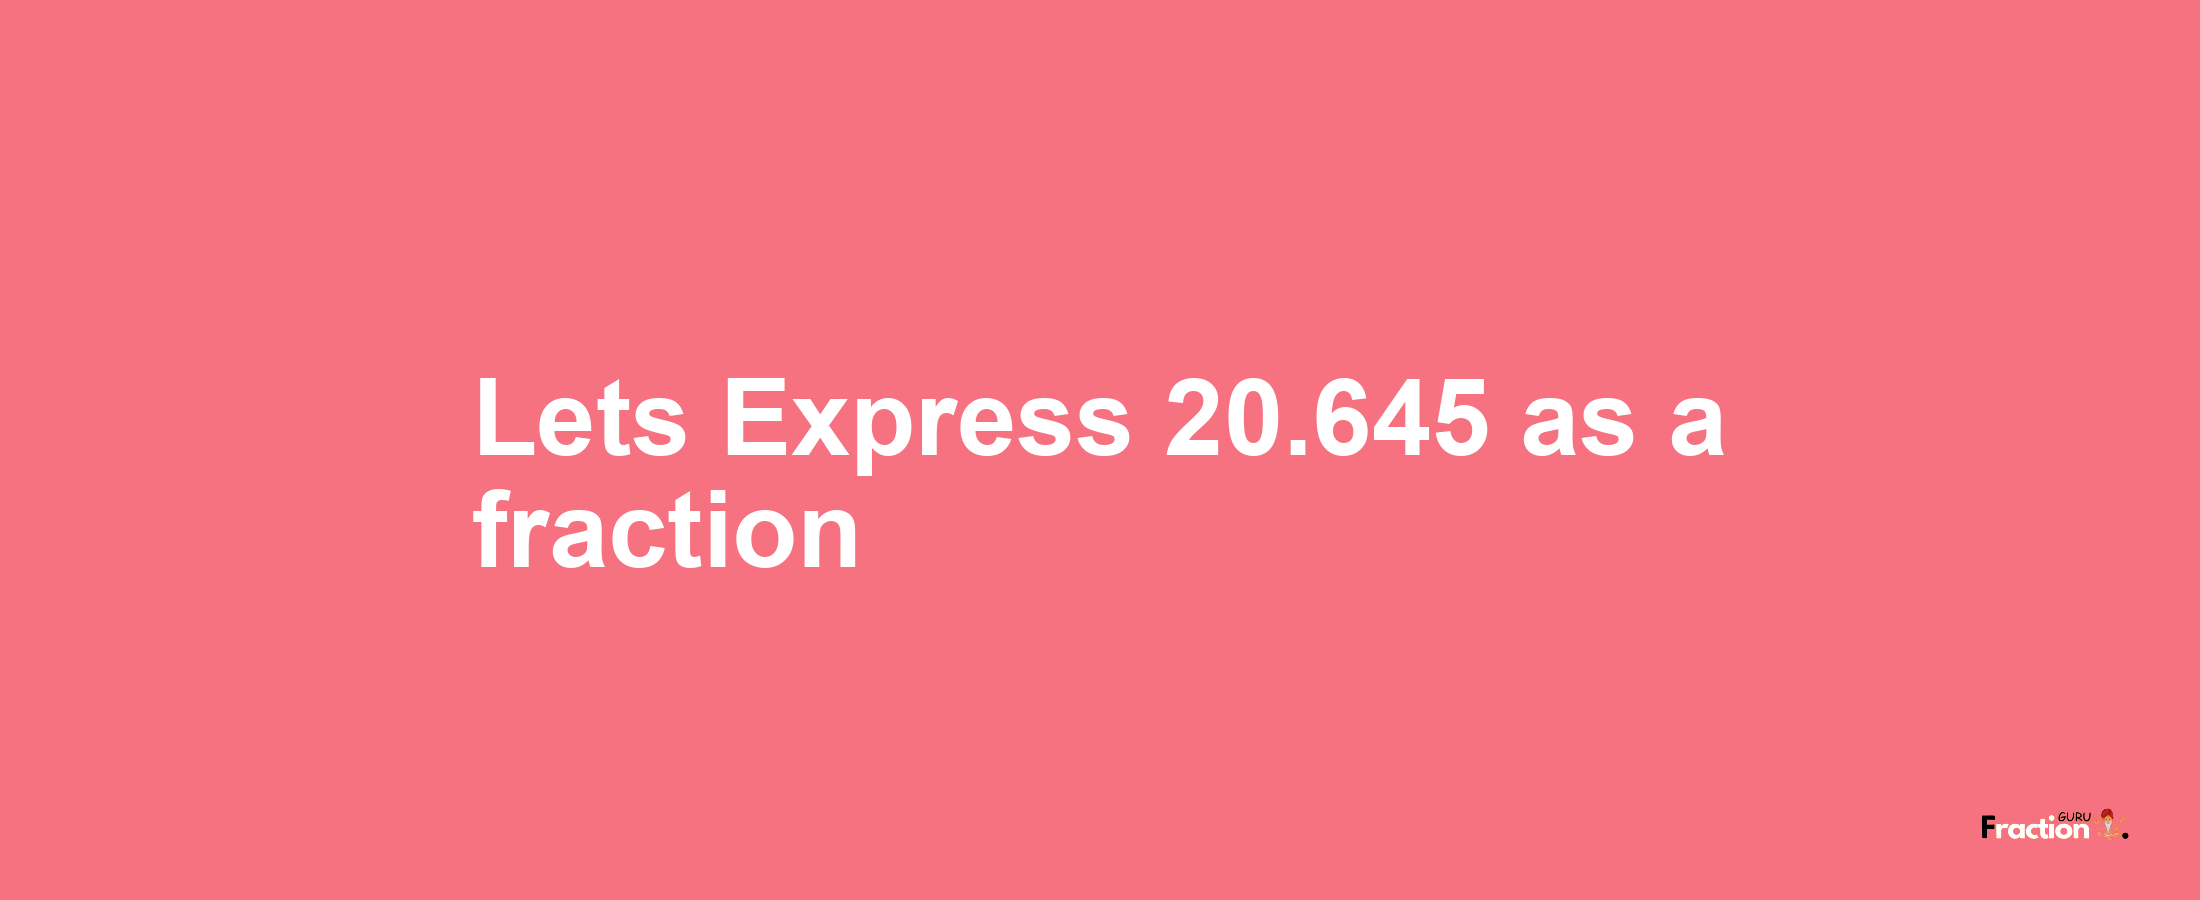 Lets Express 20.645 as afraction